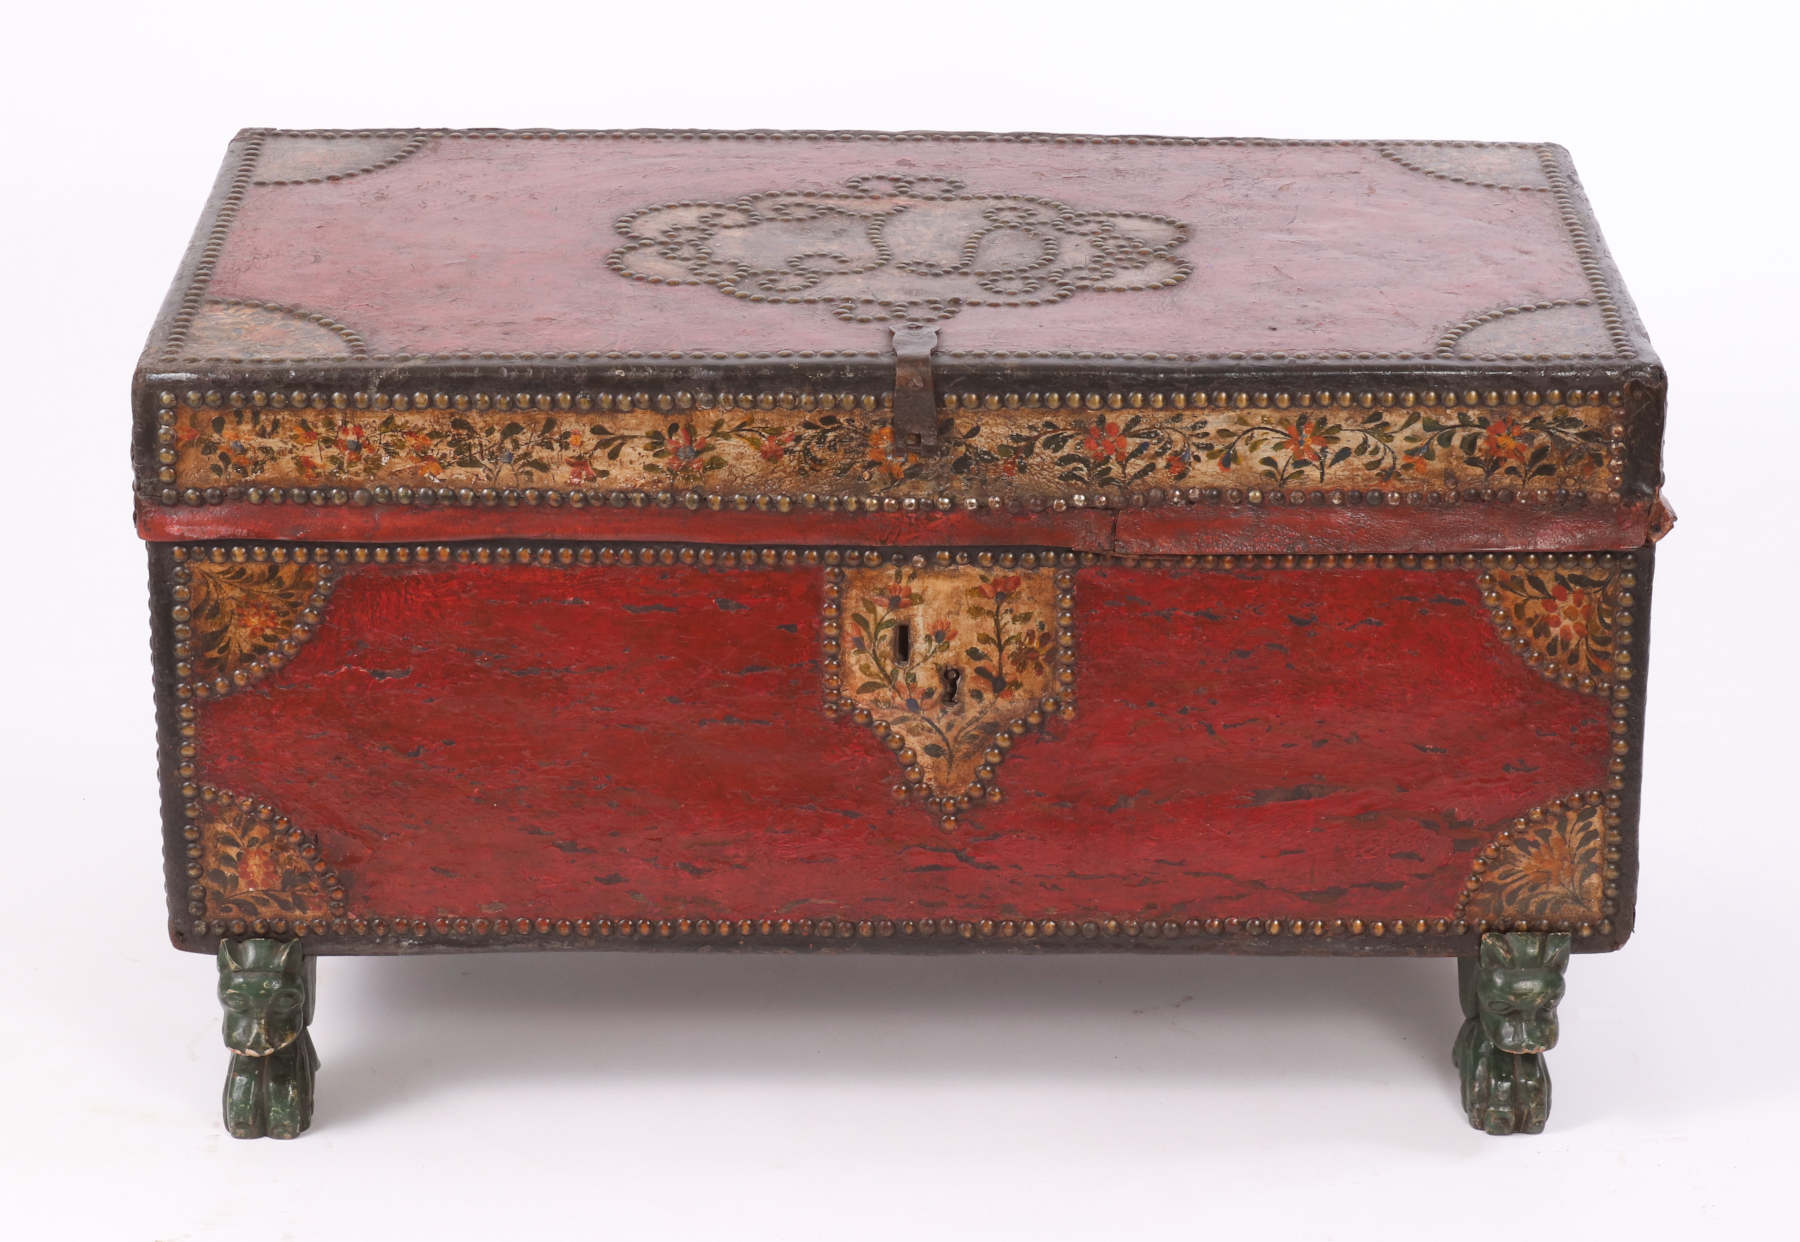 Chinese Export Leather Trunk, c. 1820